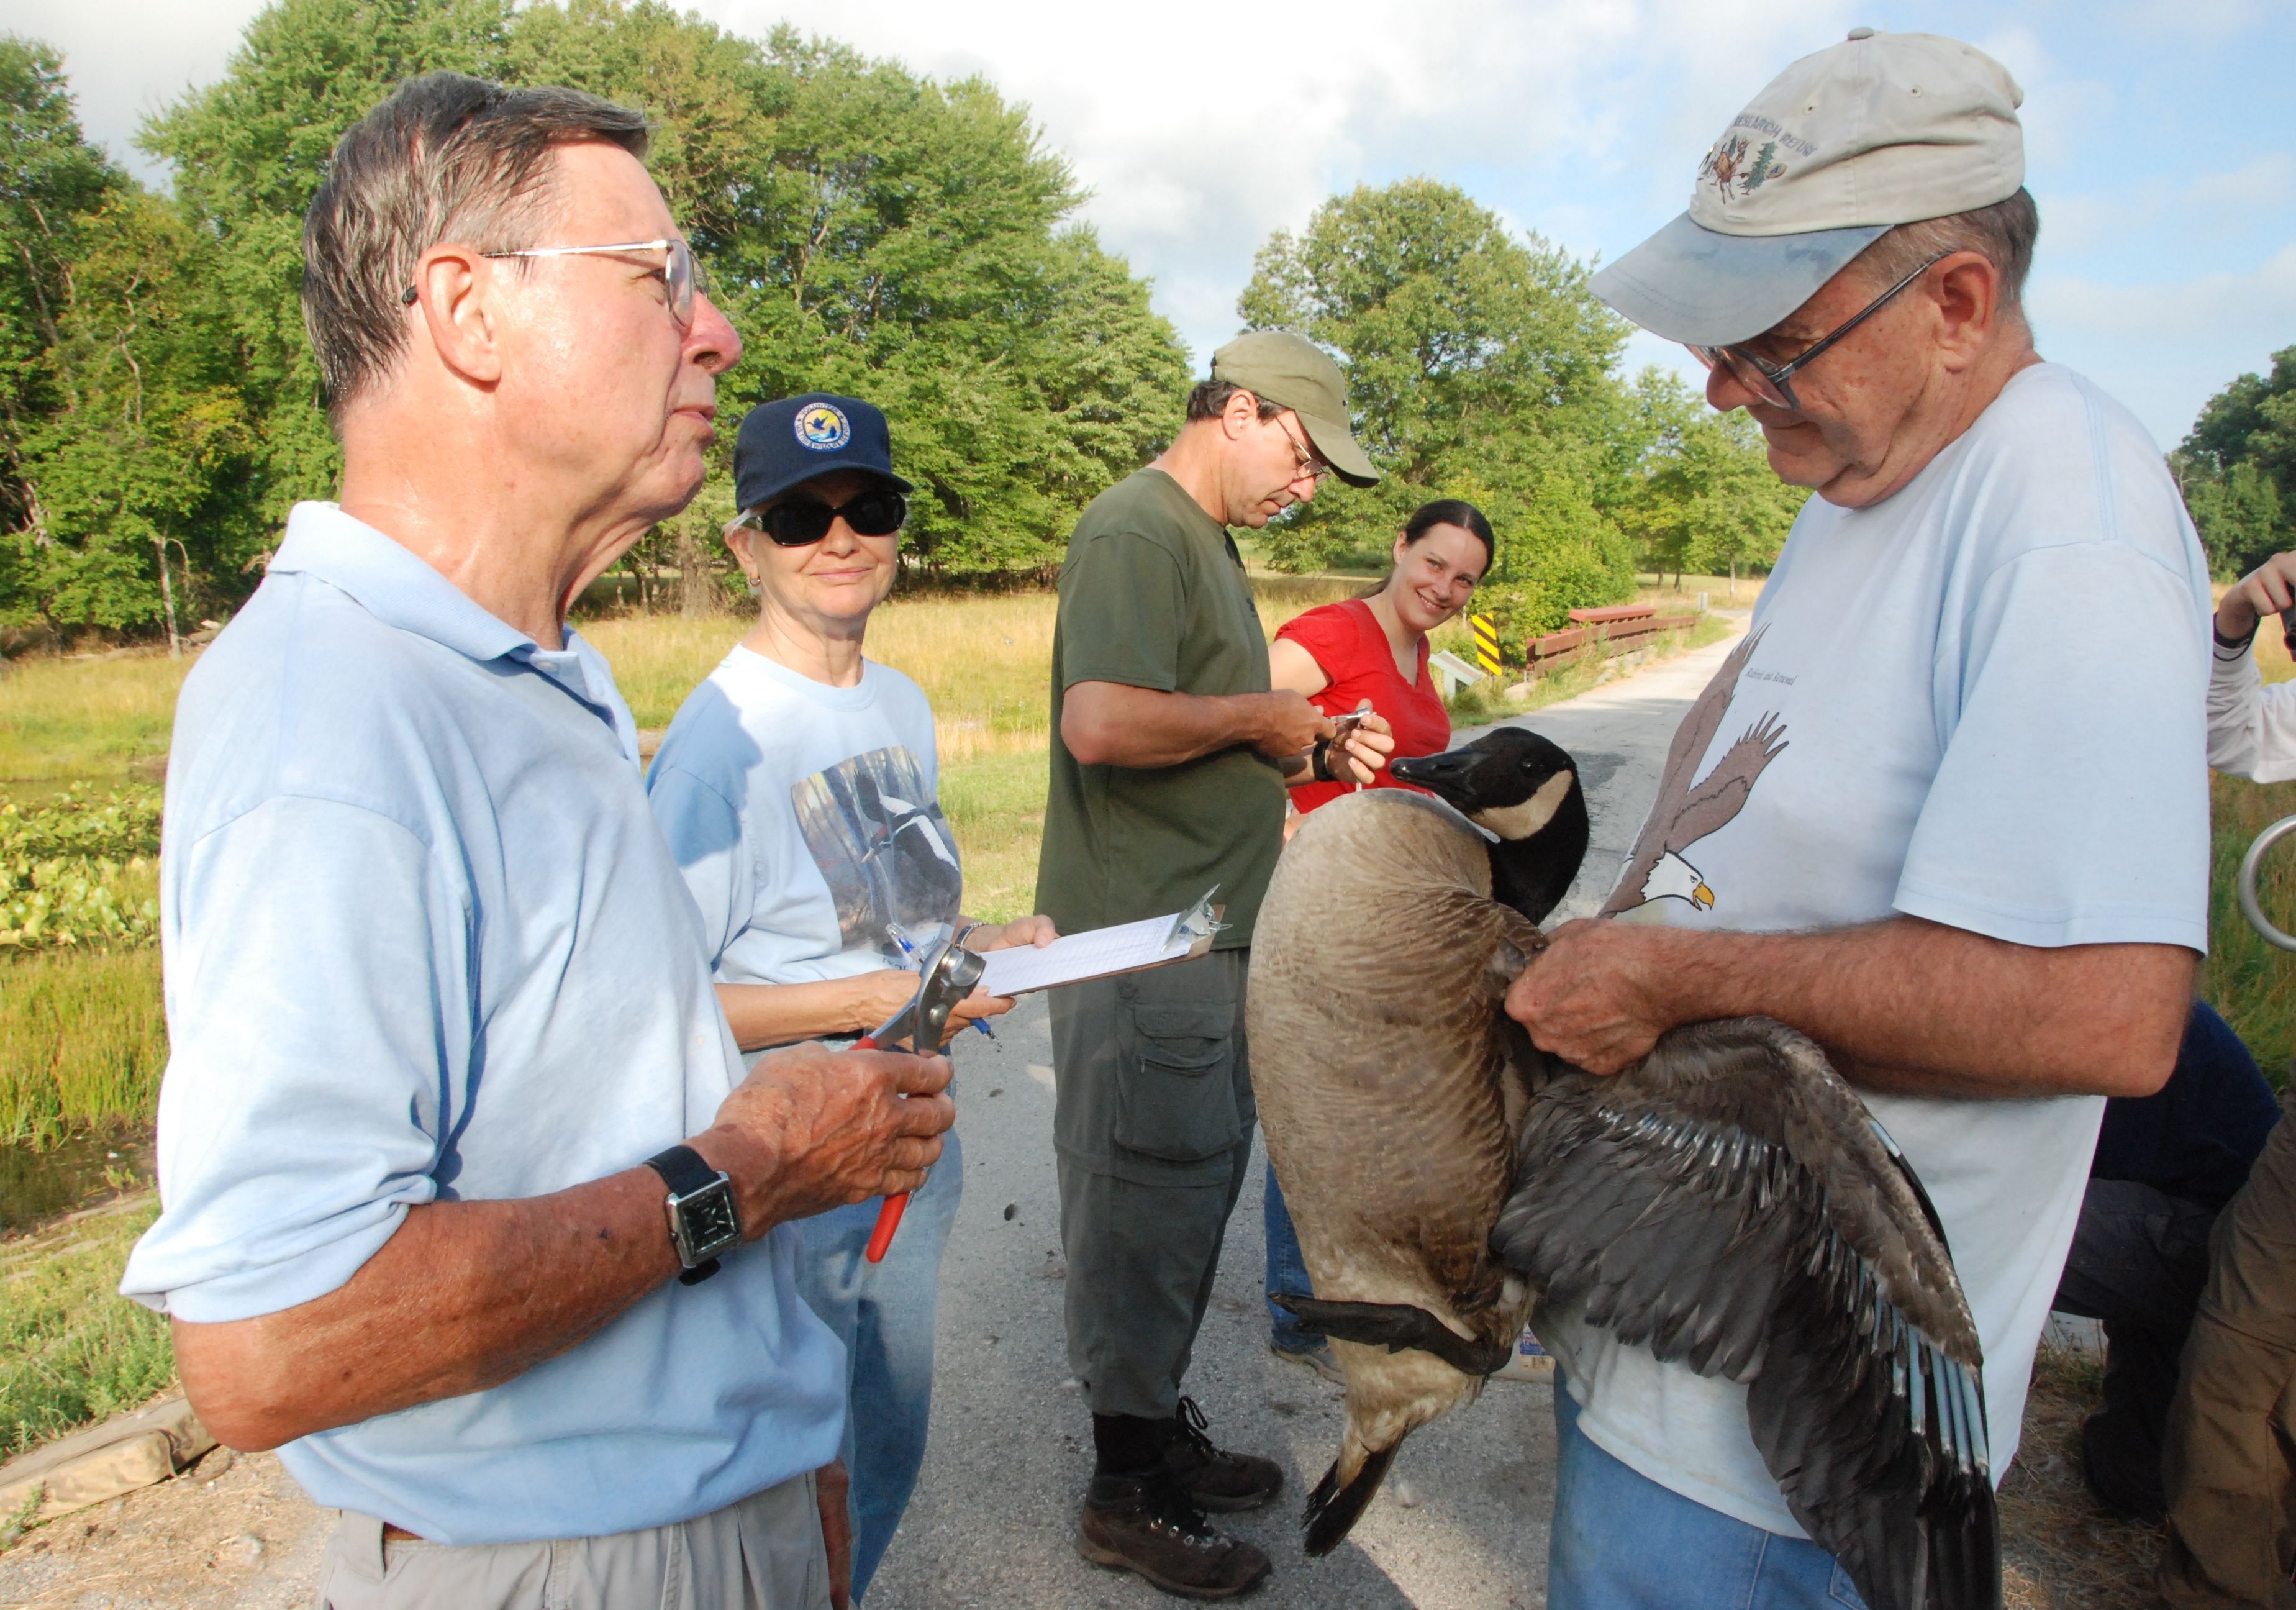 Volunteer Frank McGilvrey, left, prepares to band a Canada goose at Patuxent Research Refuge in Maryland.